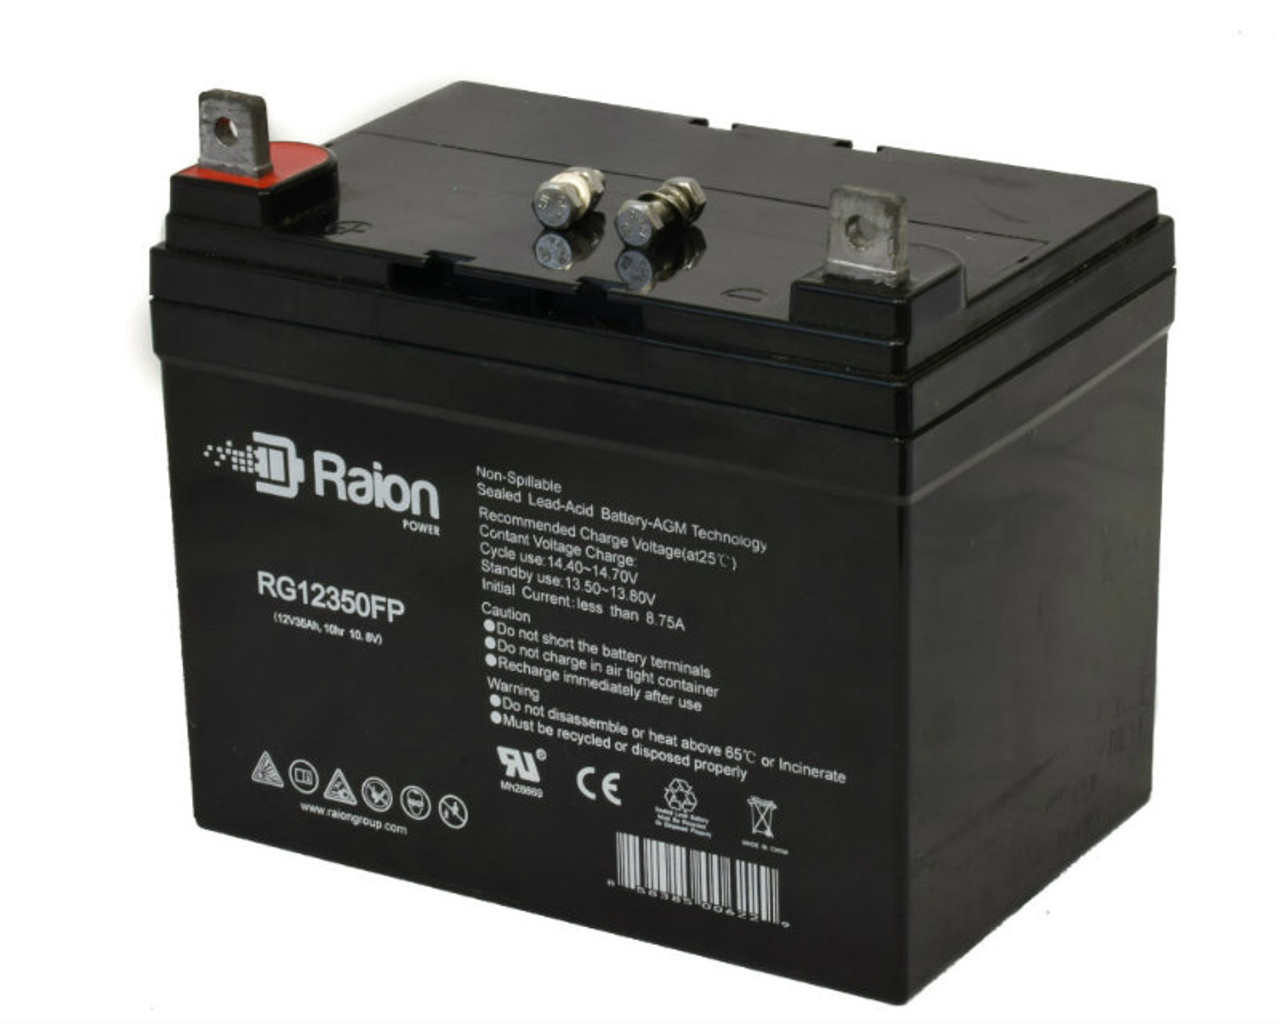 Raion Power Replacement 12V 35Ah RG12350FP Mobility Scooter Battery for Bruno AGM1234T